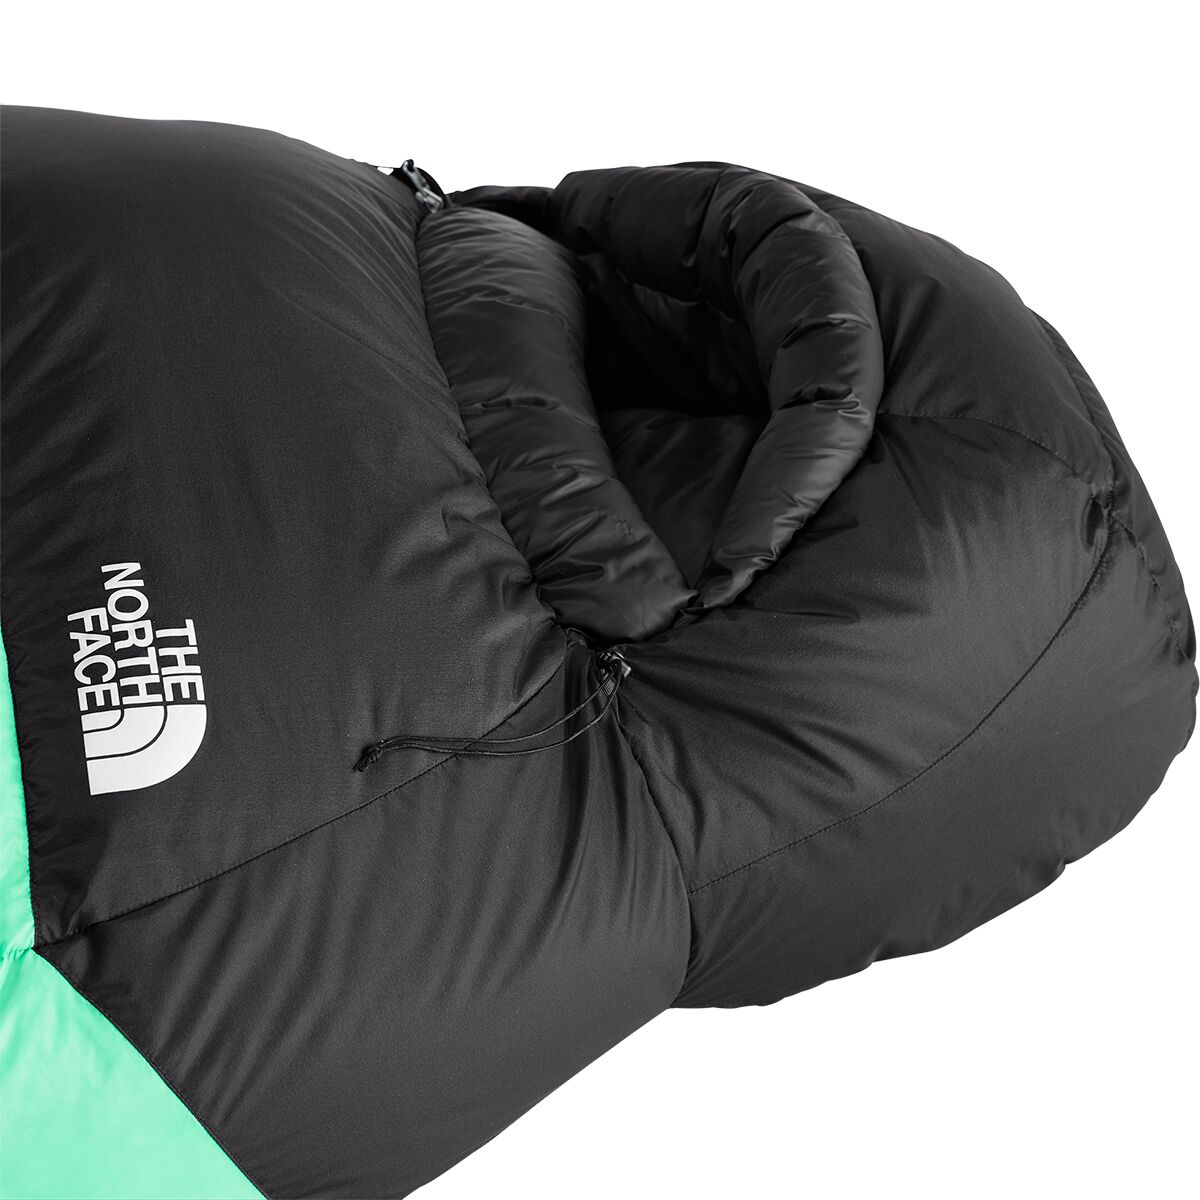 The North Face Inferno Sleeping Bag: 0F Down - Hike & Camp